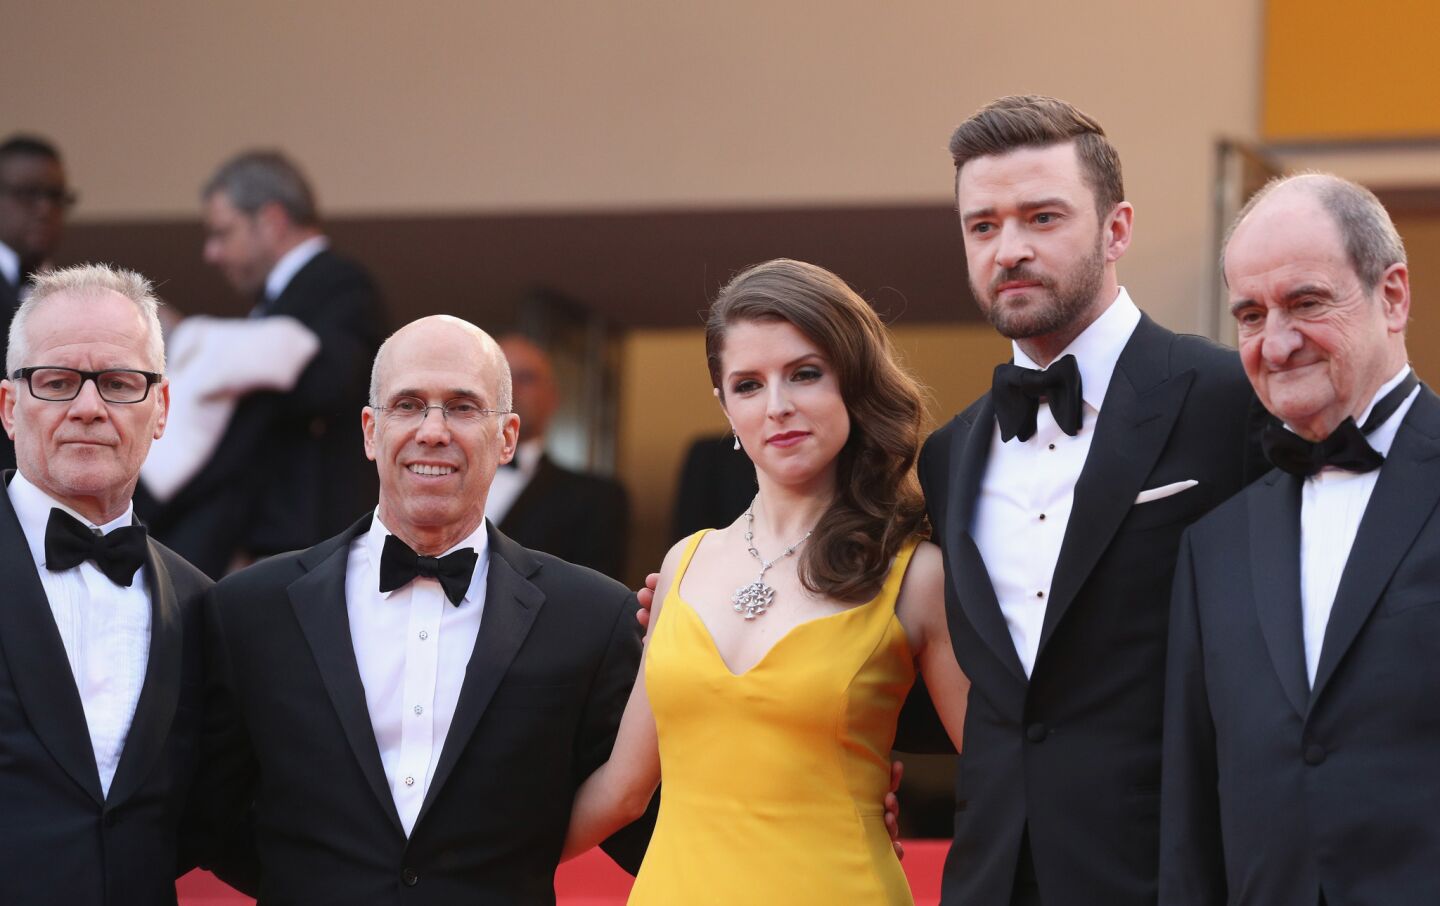 Festival director Thierry Fremau, from left, producer Jeffrey Katzenberg, actors Anna Kendrick and Justin Timberlake and festival president Pierre Lescure at the "Cafe Society" premiere and opening night gala.